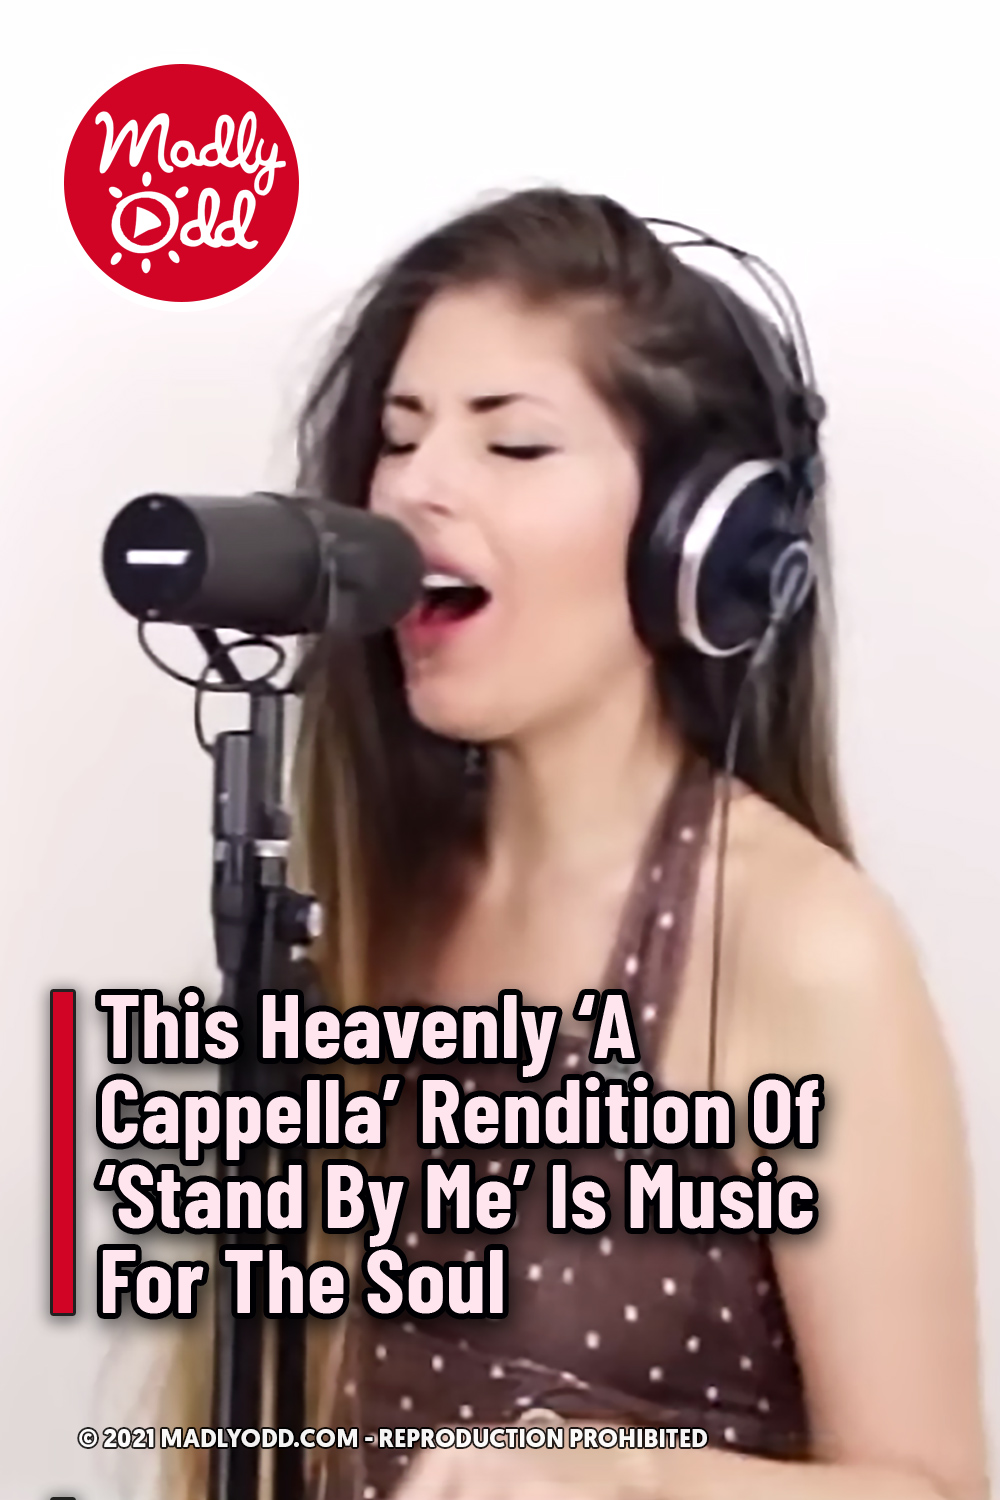 This Heavenly ‘A Cappella’ Rendition Of ‘Stand By Me’ Is Music For The Soul